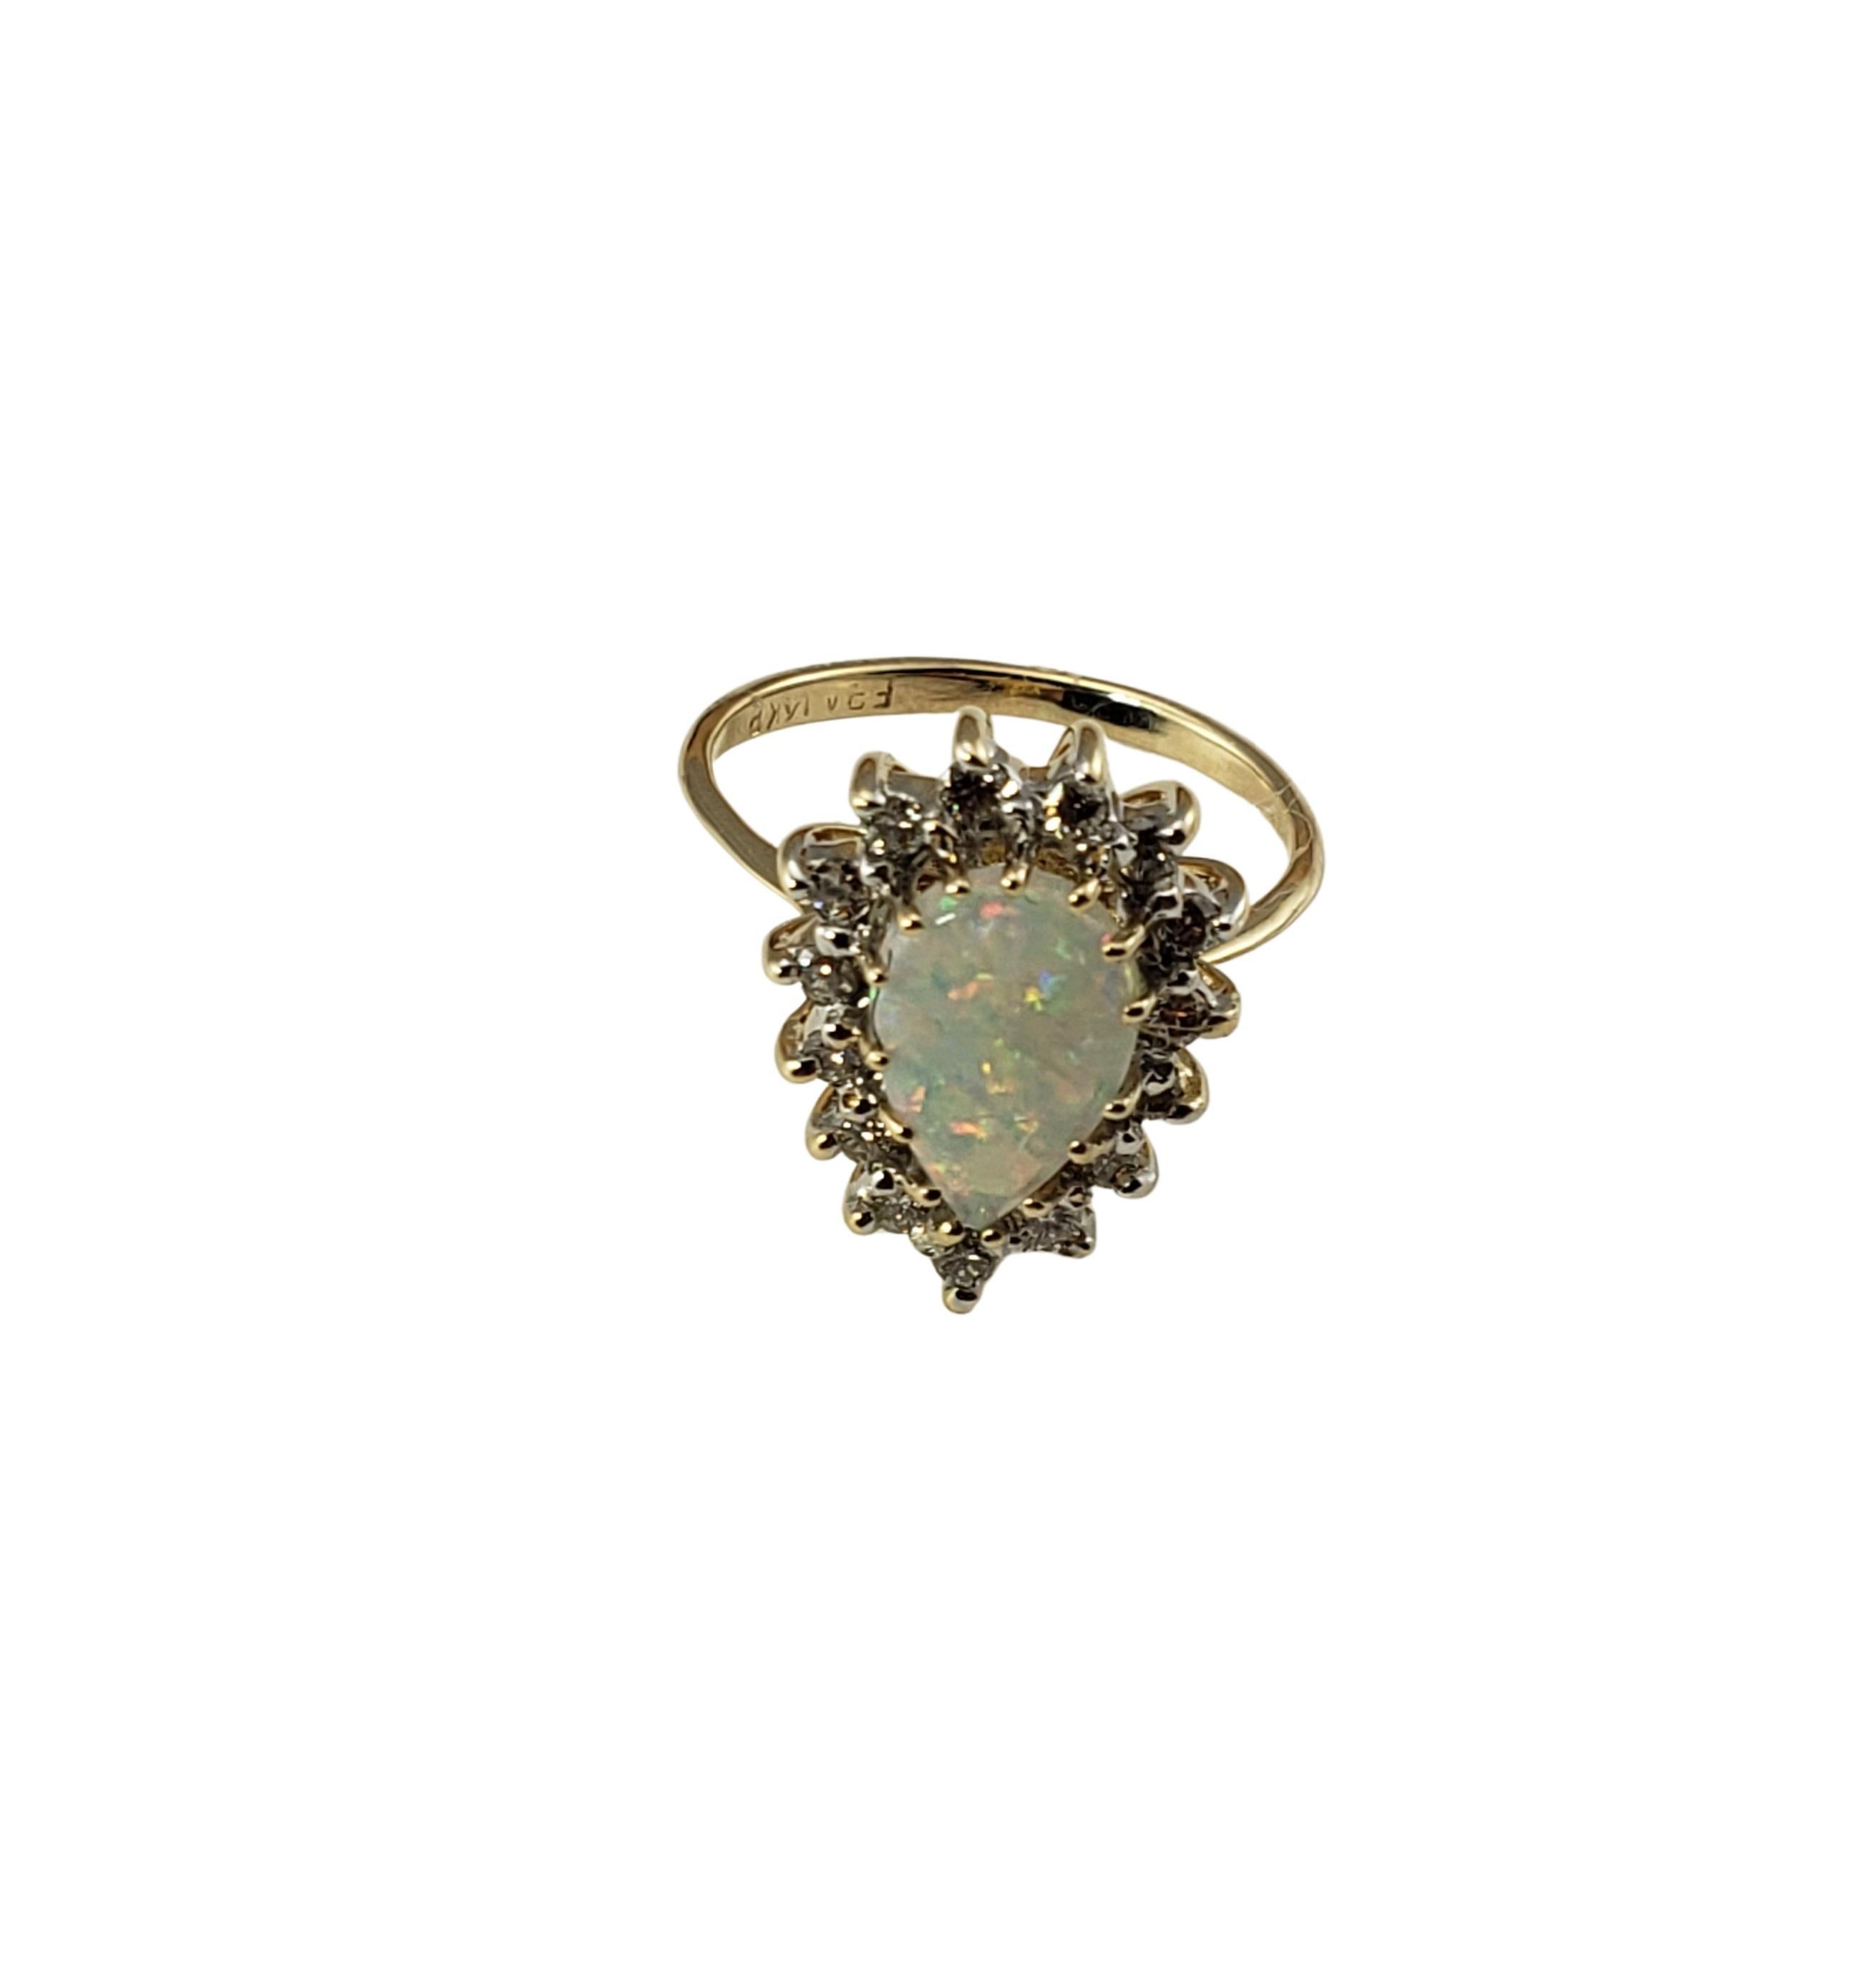 Vintage 14 Karat Yellow Gold Opal and Diamond Ring Size 4-

This stunning ring features one pear shaped opal (10 mm x 7 mm) surrounded by 15 round brilliant cut diamonds set in classic 14K yellow gold. Shank: 1.5 mm.

Approximate total diamond